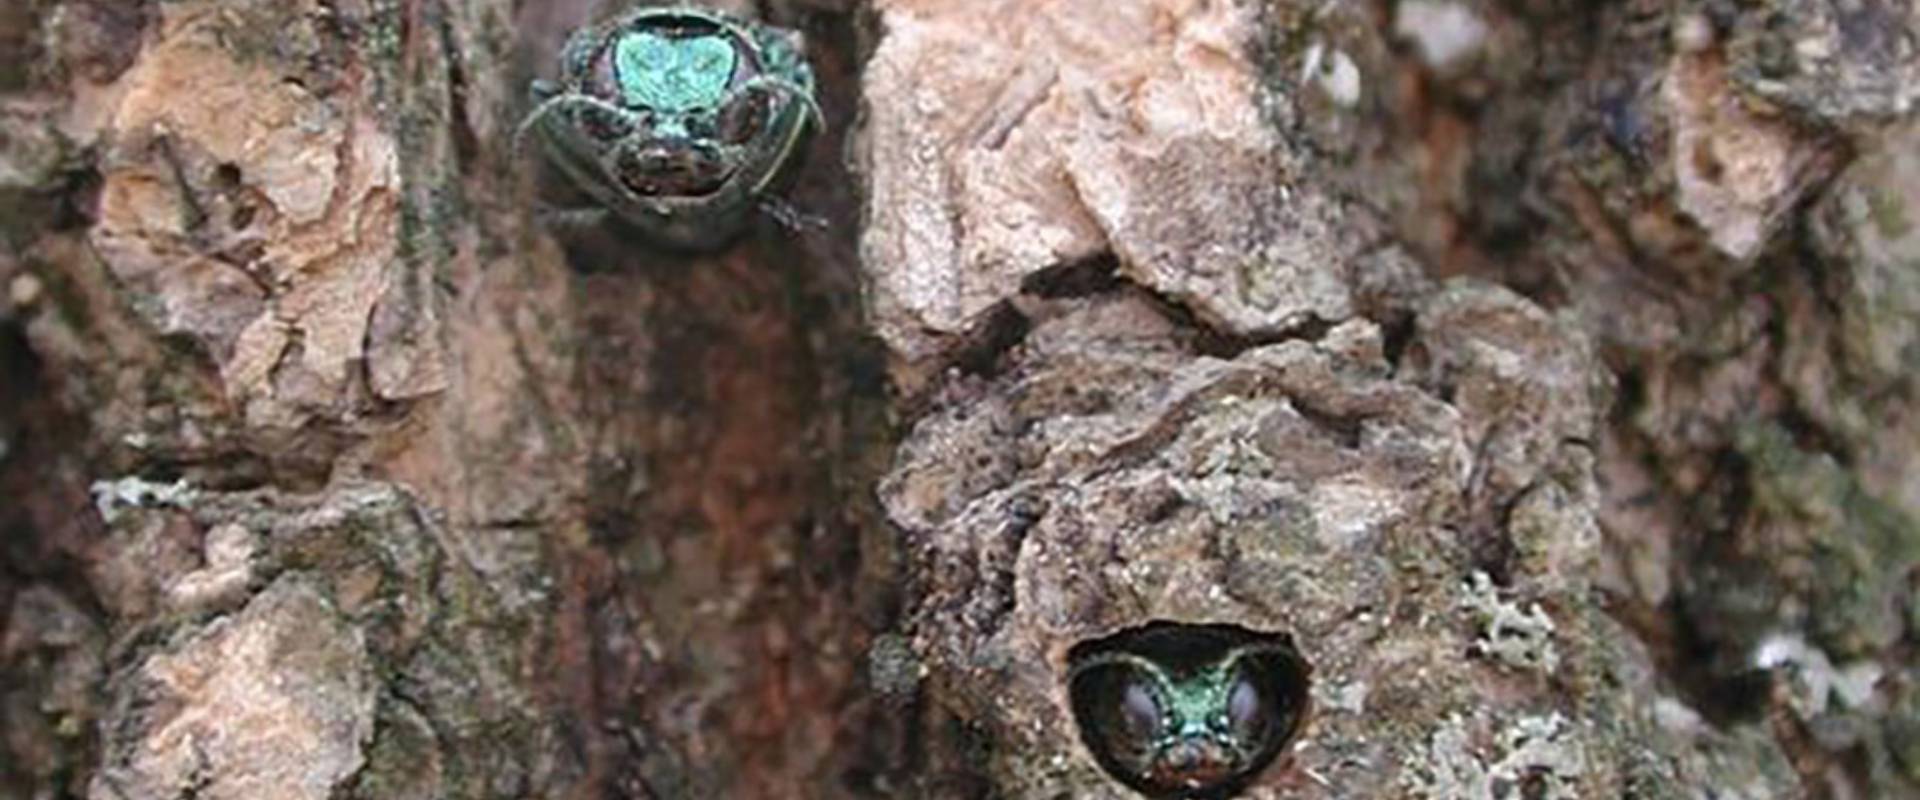 Adult emerald ash borers are exiting through D-shaped holes in the trunk of an ash tree.